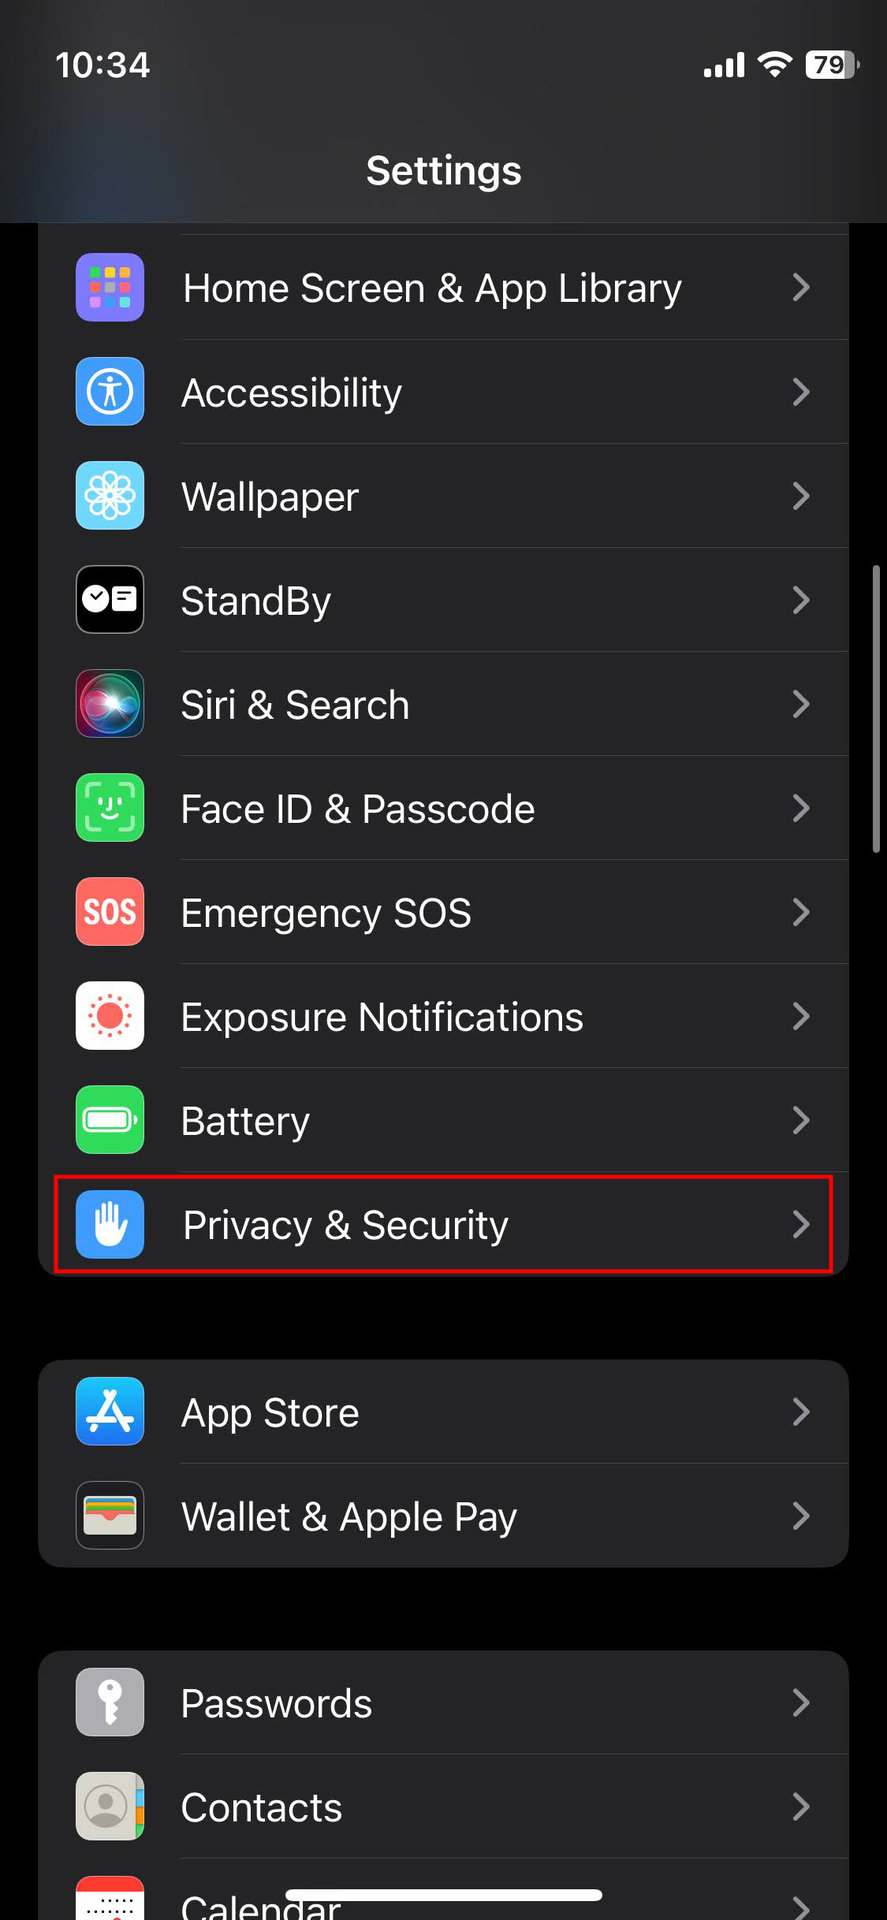 Turn off Developer Mode from the iPhone settings (1)